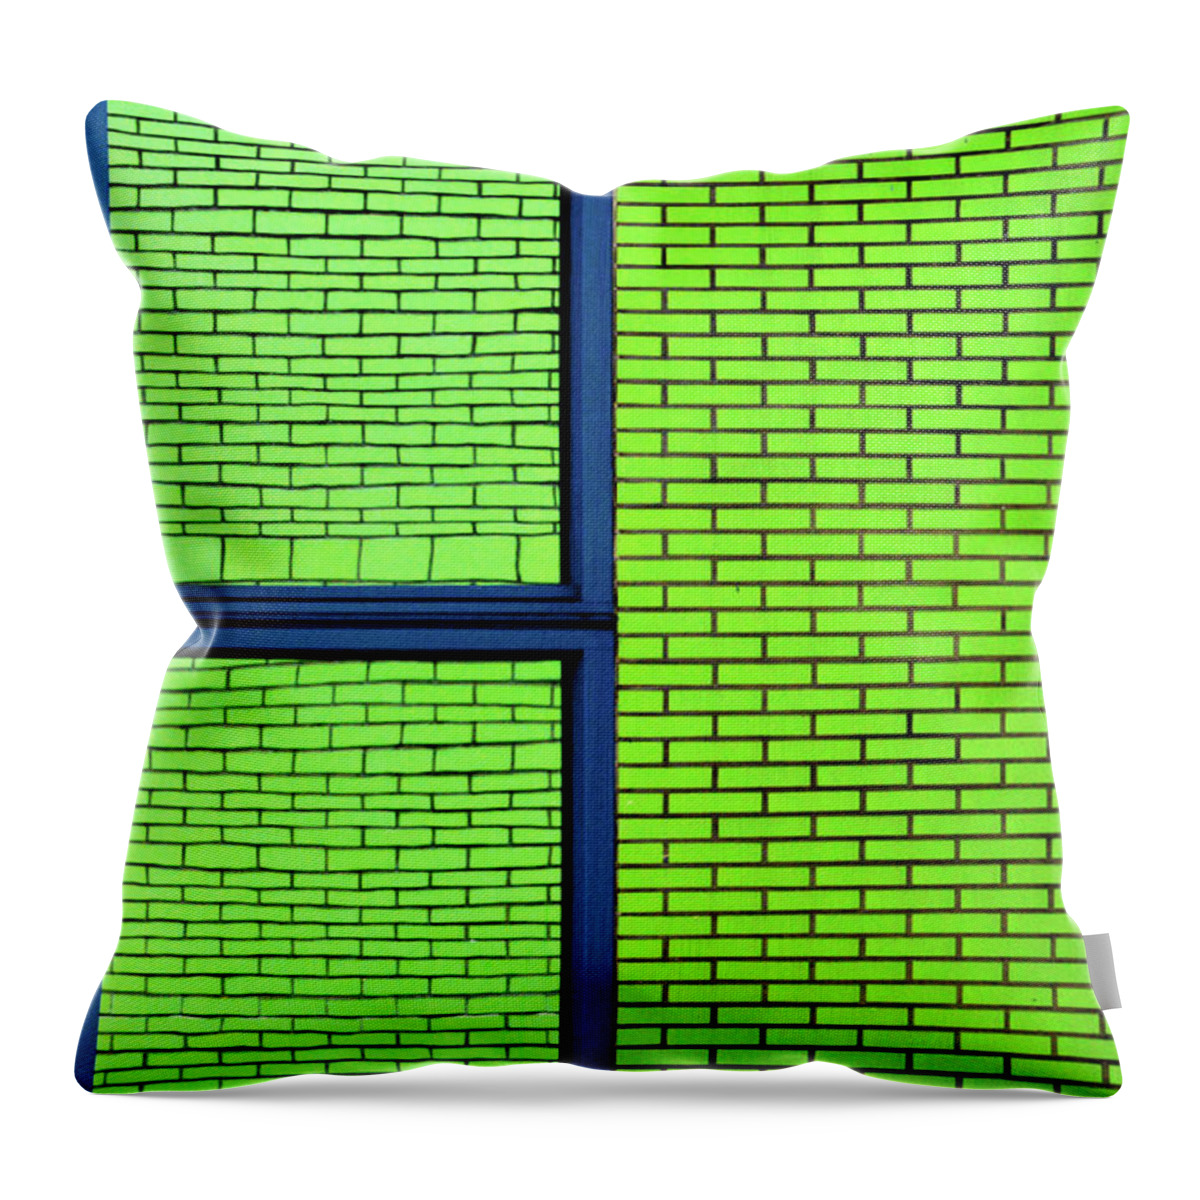 Reflection Throw Pillow featuring the photograph Abstritecture 10 by Stuart Allen